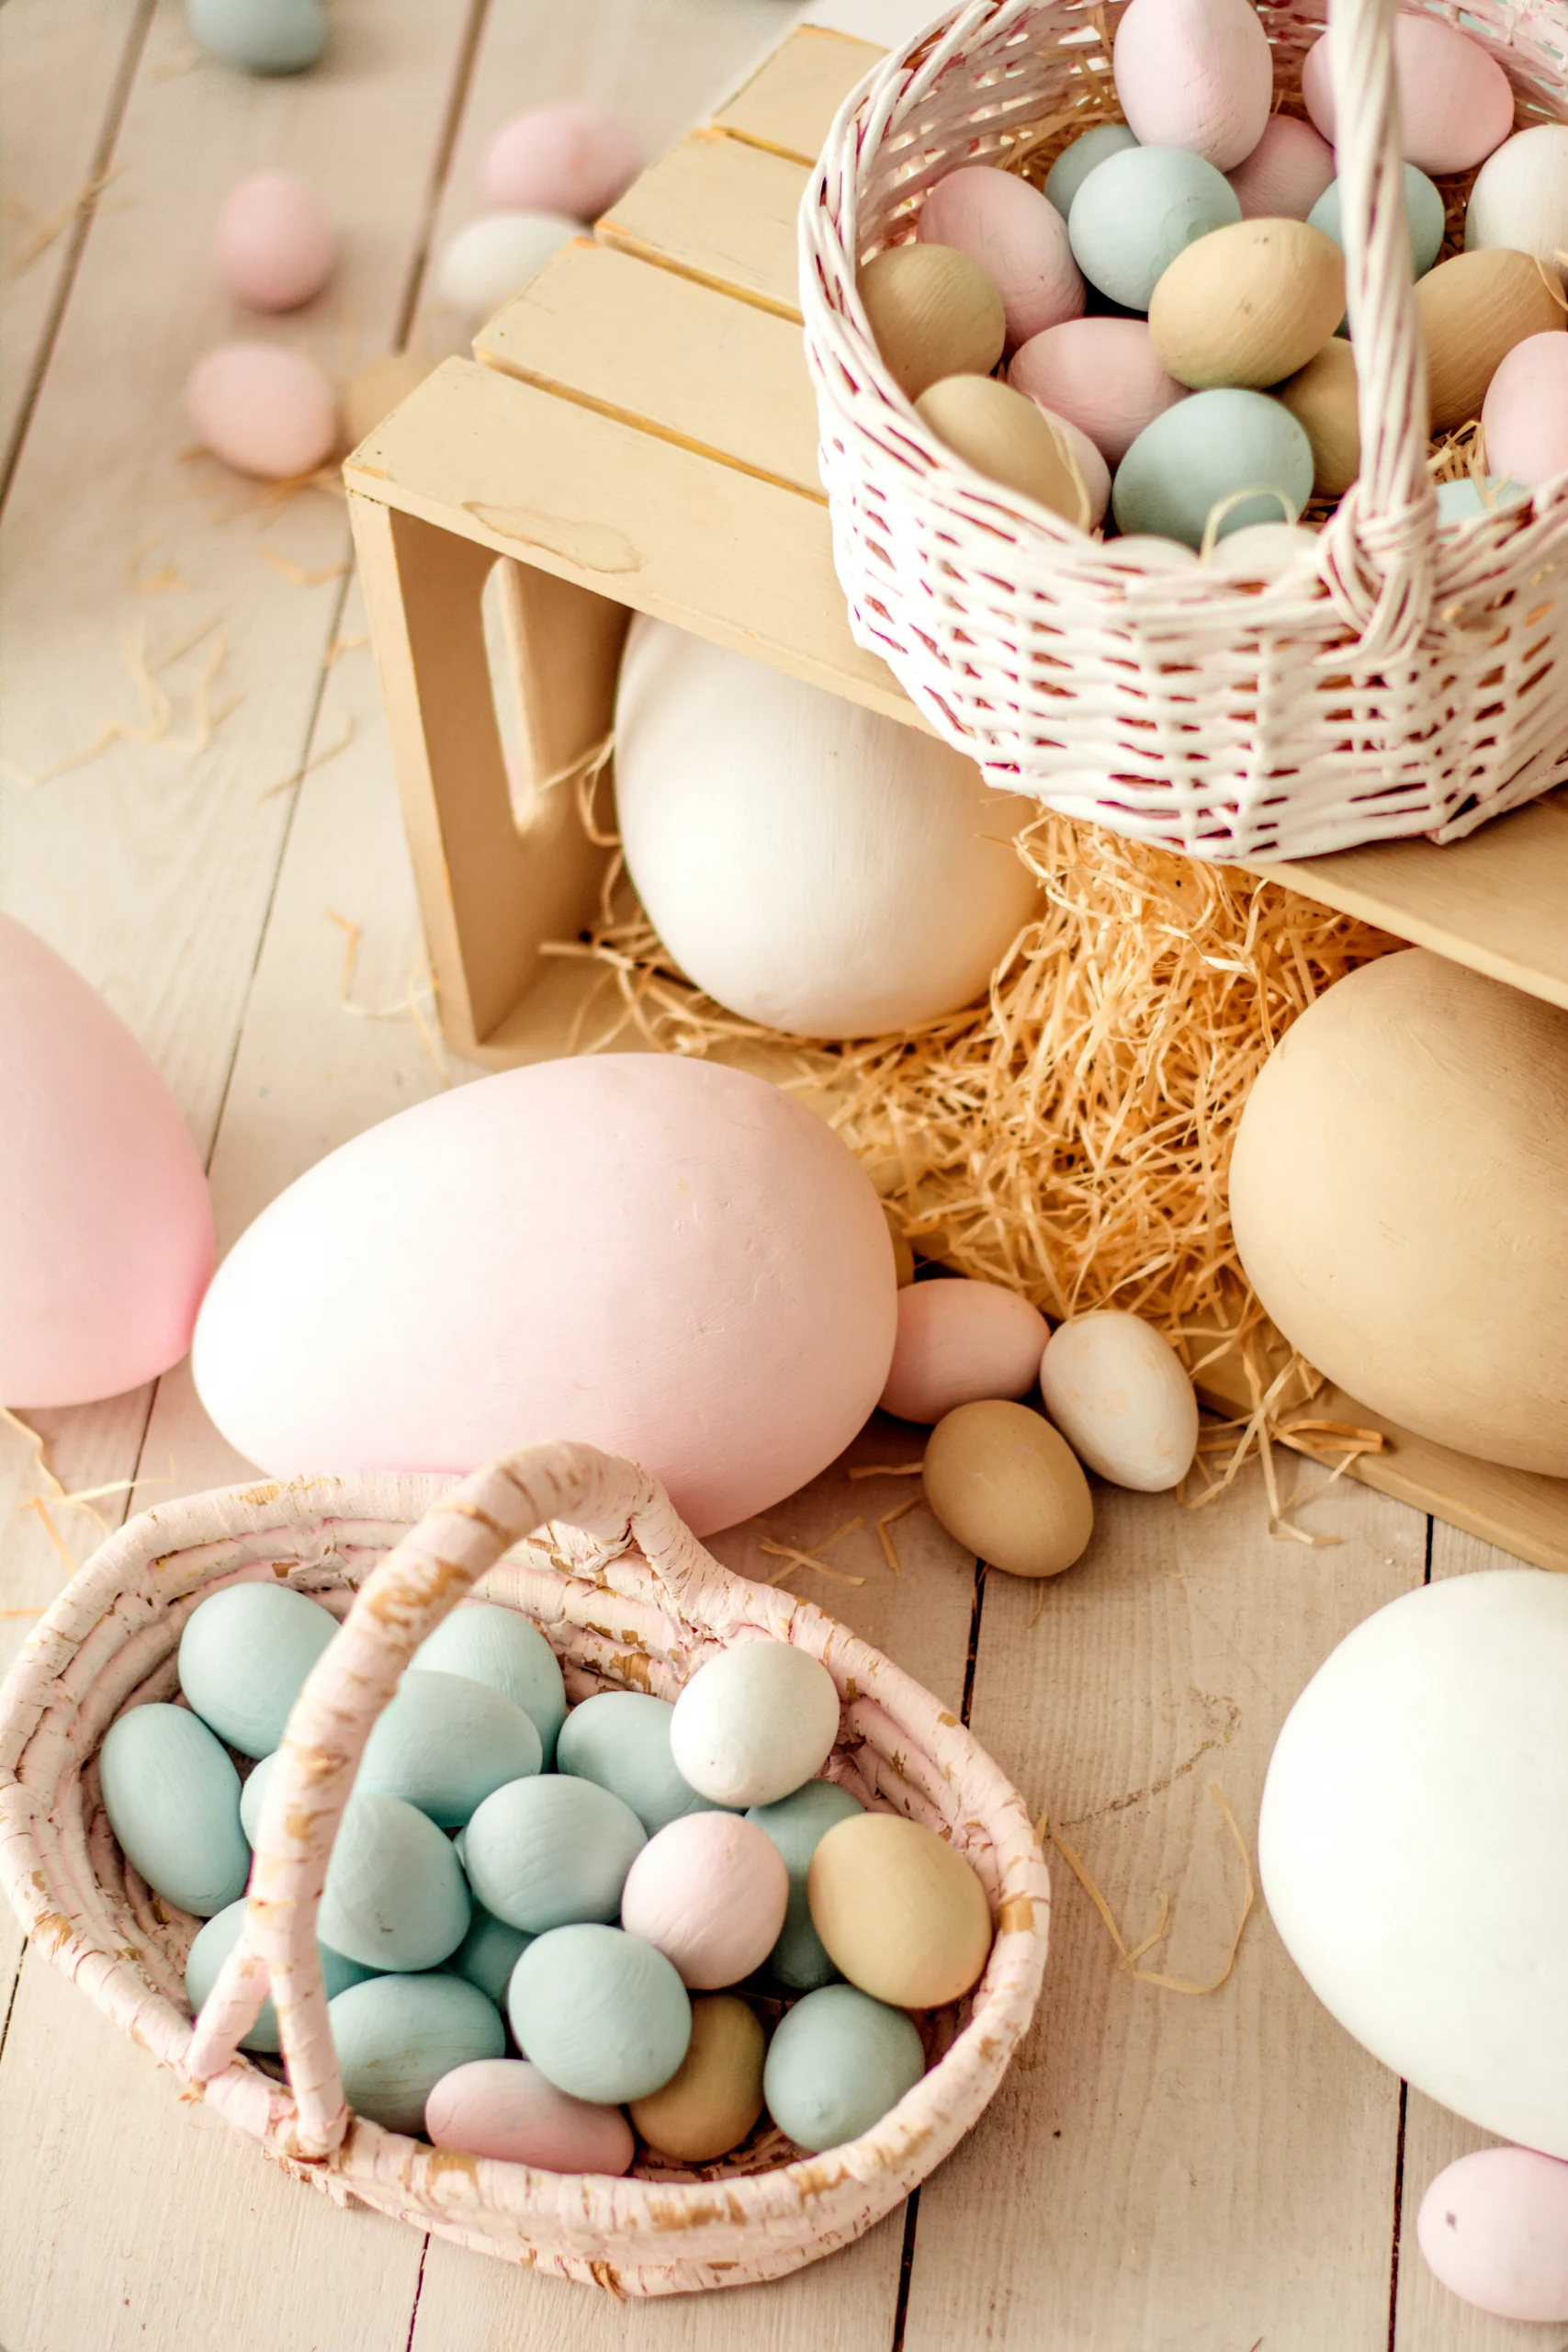 Display of colorful eggs in pale pink baskets